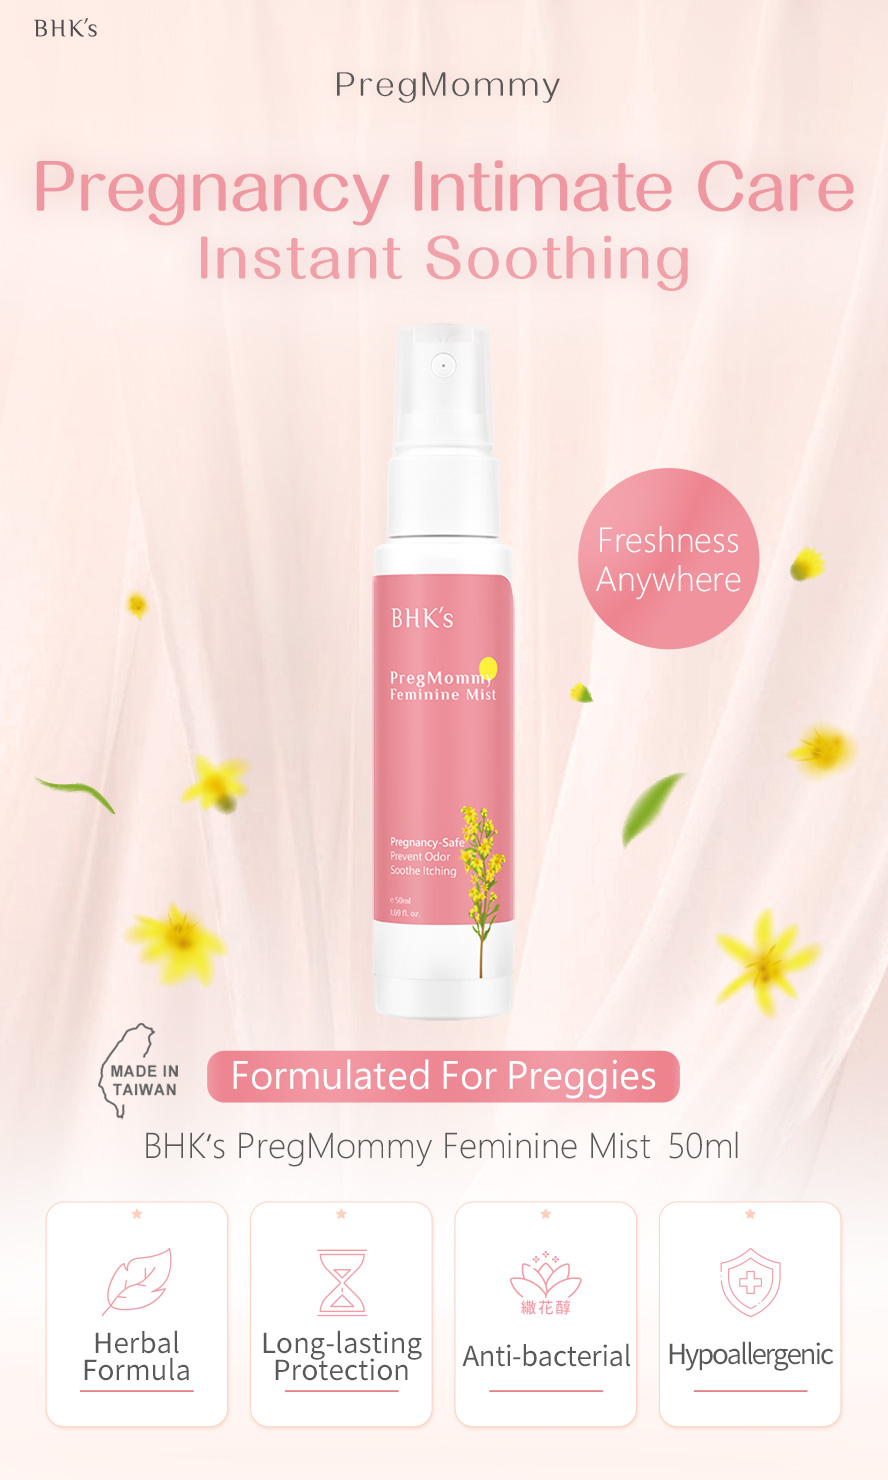 BHK's PregMommy Feminine Mist provide instant soothing effect and long-lasting anti-bacterial protection for pregnant women